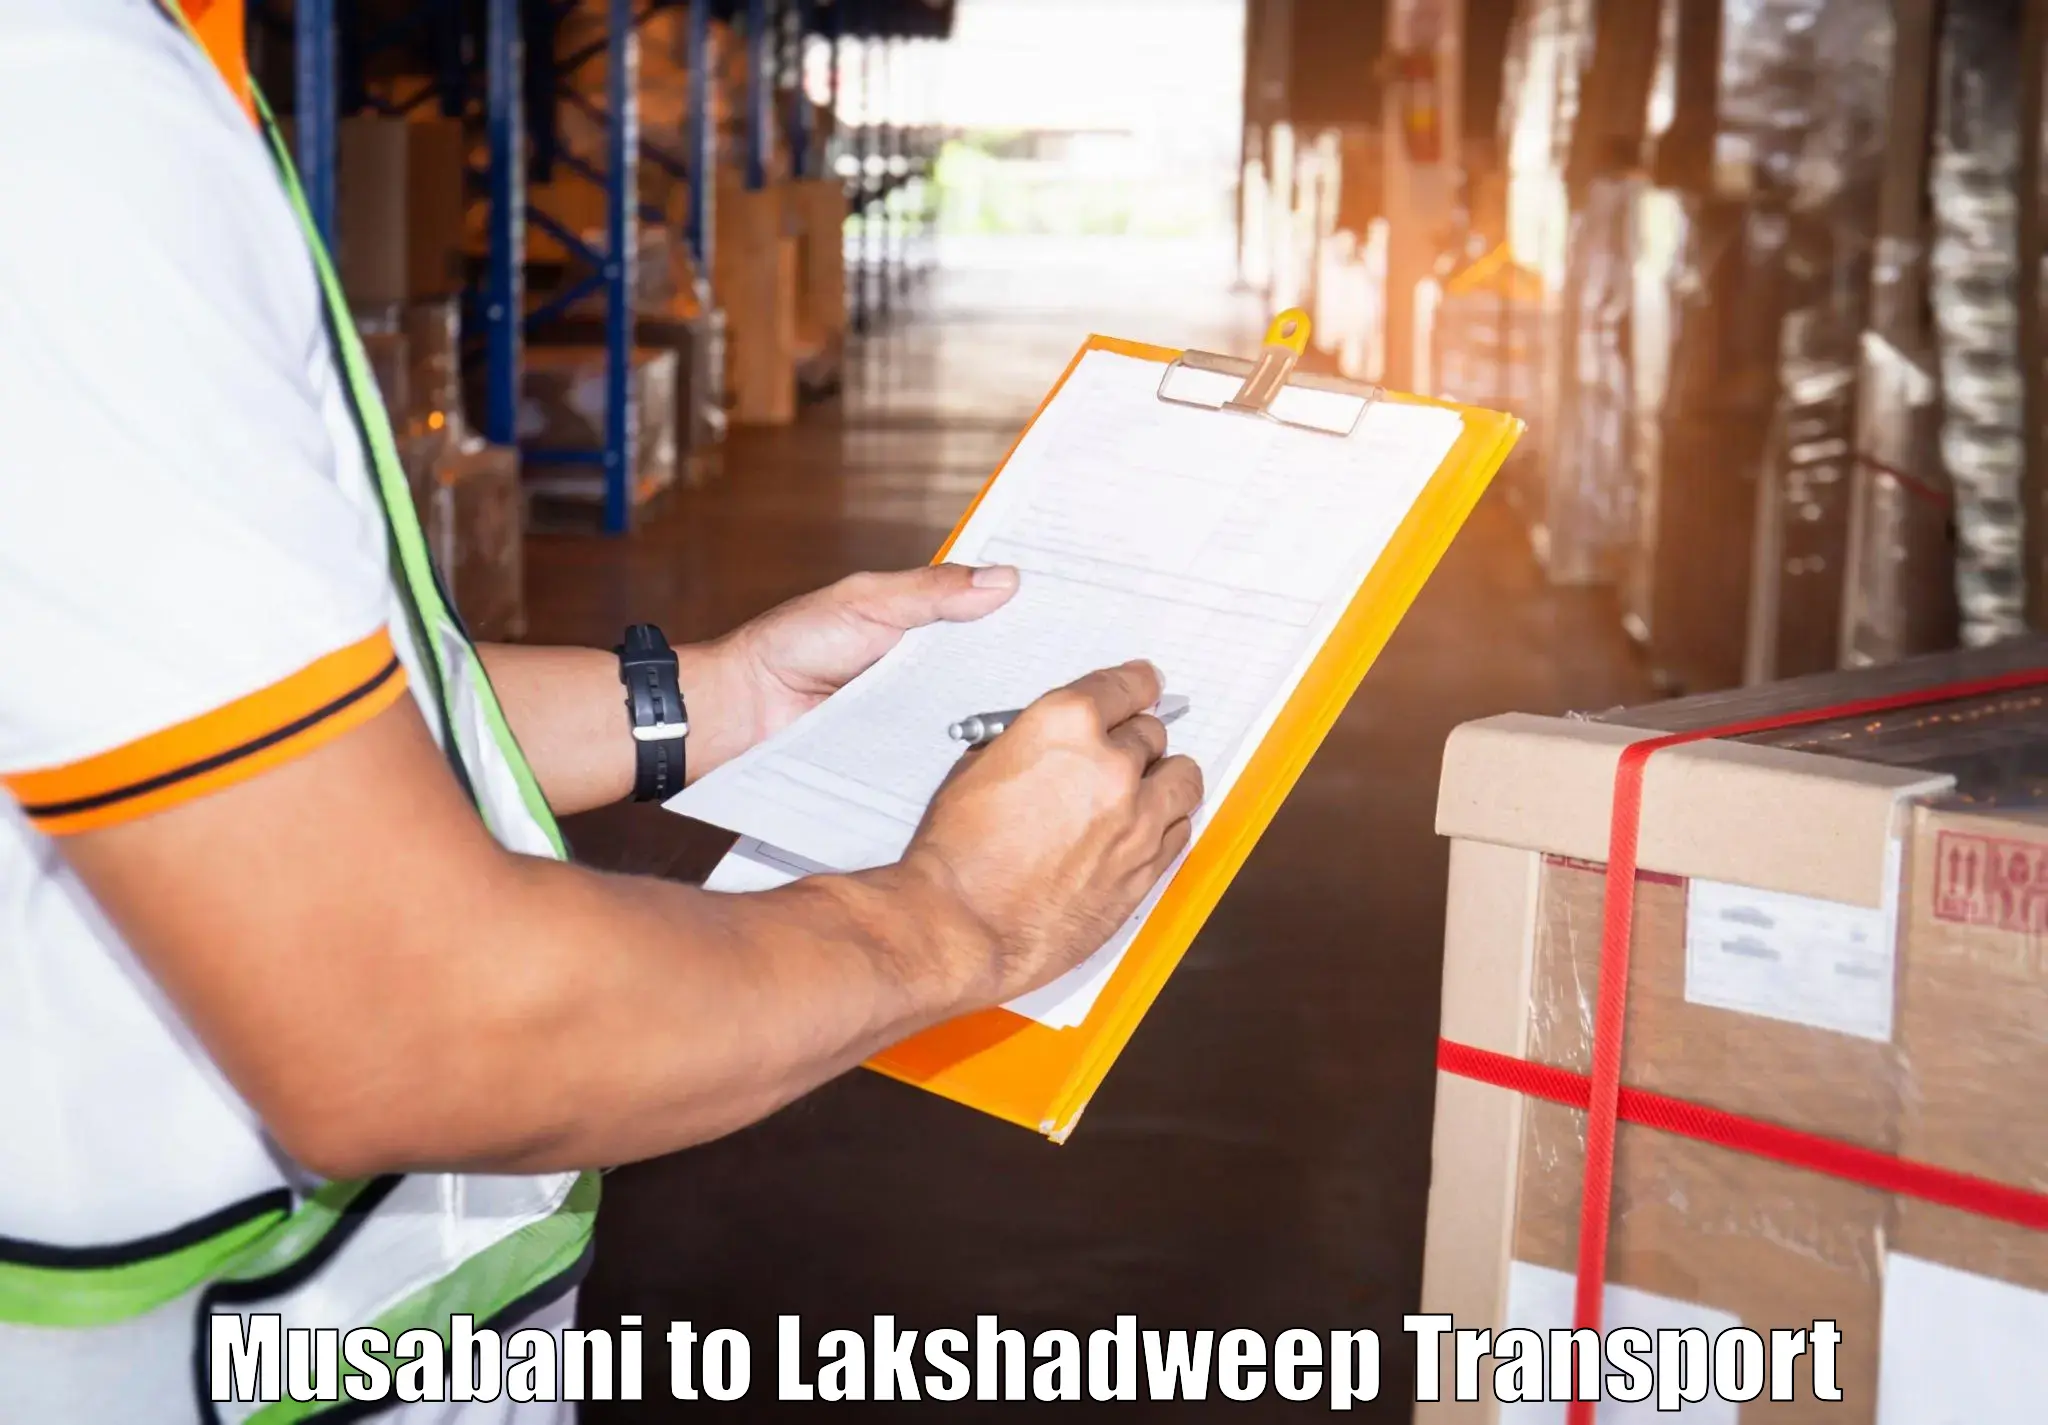 Container transport service Musabani to Lakshadweep